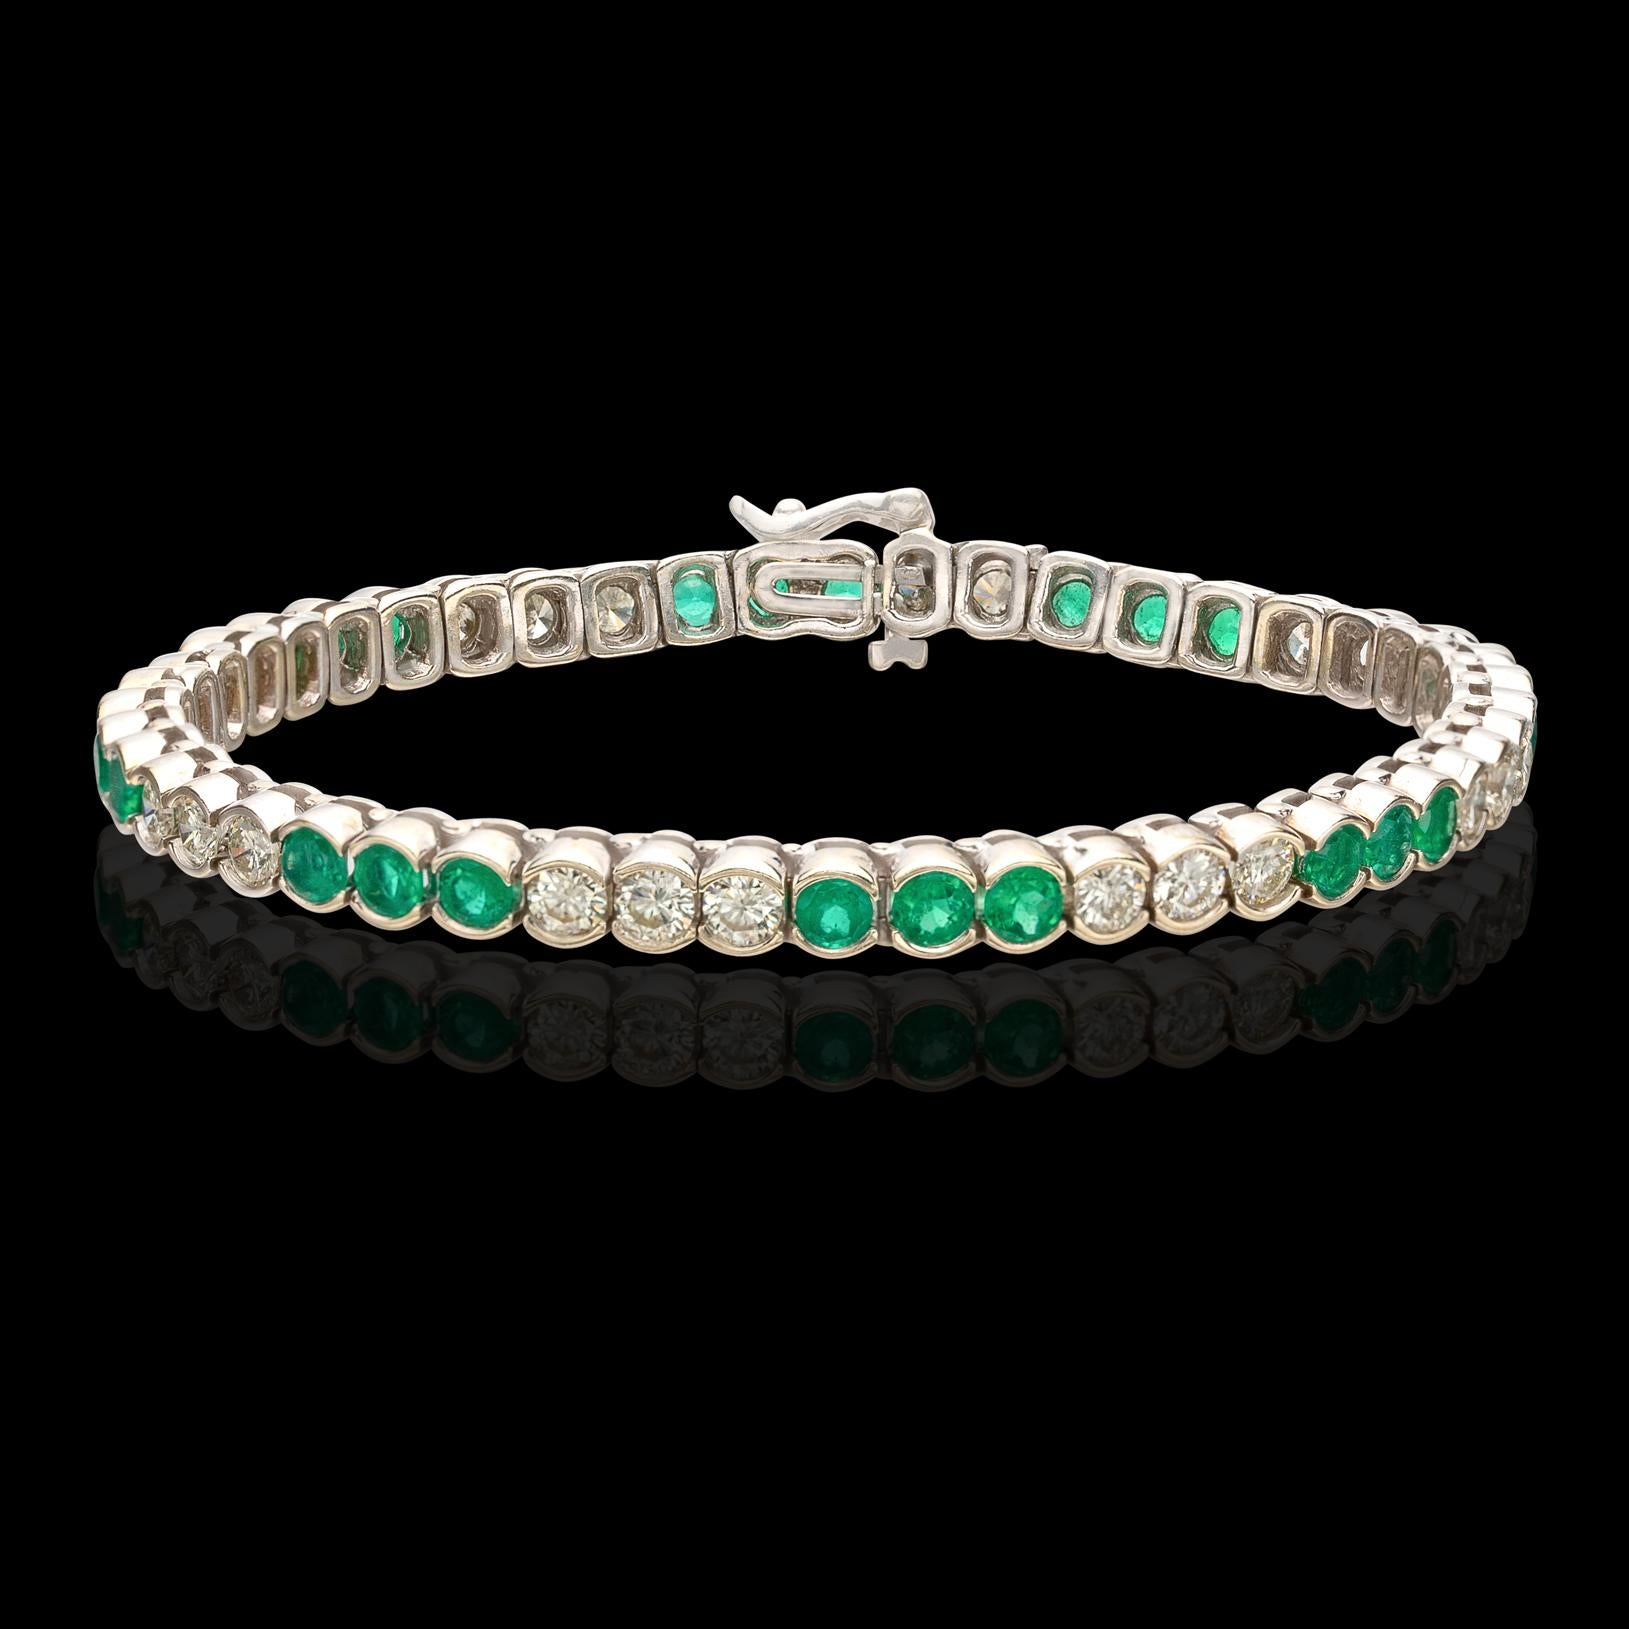 For the lover of brilliant green! The 18k white gold tennis bracelet is designed with 24 semi-bezel-set round emeralds of lively green color, weighing together 4.00 carats, alternating with 23 round  brilliant-cut diamonds, H-I/VS-SI, weighing in